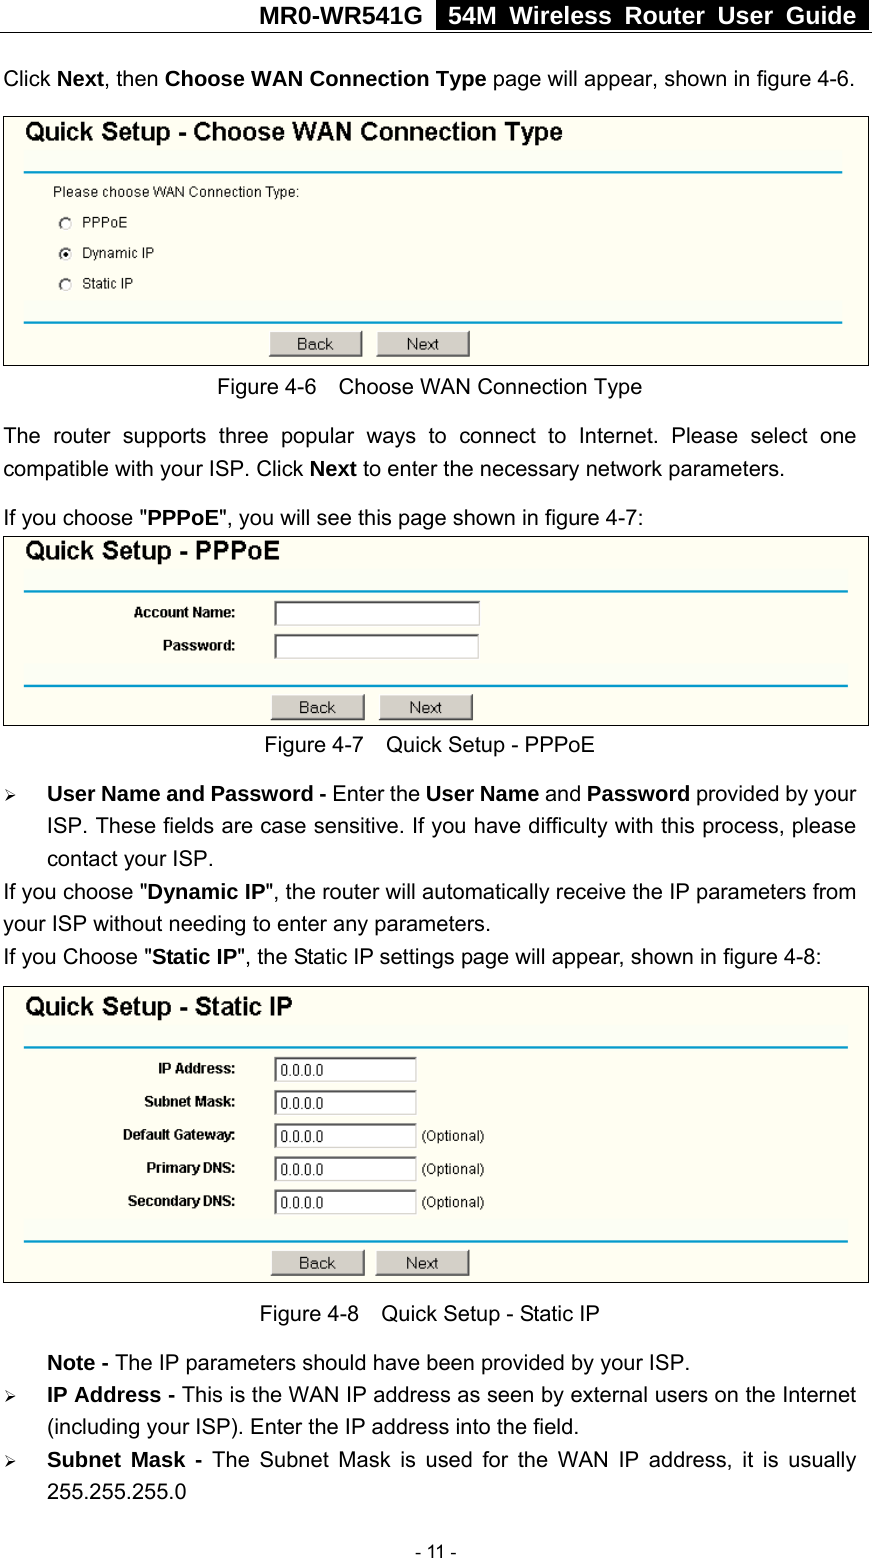 MR0-WR541G   54M Wireless Router User Guide  Click Next, then Choose WAN Connection Type page will appear, shown in figure 4-6.  Figure 4-6    Choose WAN Connection Type The router supports three popular ways to connect to Internet. Please select one compatible with your ISP. Click Next to enter the necessary network parameters. If you choose &quot;PPPoE&quot;, you will see this page shown in figure 4-7:    Figure 4-7    Quick Setup - PPPoE ¾ User Name and Password - Enter the User Name and Password provided by your ISP. These fields are case sensitive. If you have difficulty with this process, please contact your ISP. If you choose &quot;Dynamic IP&quot;, the router will automatically receive the IP parameters from your ISP without needing to enter any parameters. If you Choose &quot;Static IP&quot;, the Static IP settings page will appear, shown in figure 4-8:    Figure 4-8    Quick Setup - Static IP  Note - The IP parameters should have been provided by your ISP. ¾ IP Address - This is the WAN IP address as seen by external users on the Internet (including your ISP). Enter the IP address into the field. ¾ Subnet Mask - The Subnet Mask is used for the WAN IP address, it is usually 255.255.255.0  - 11 - 